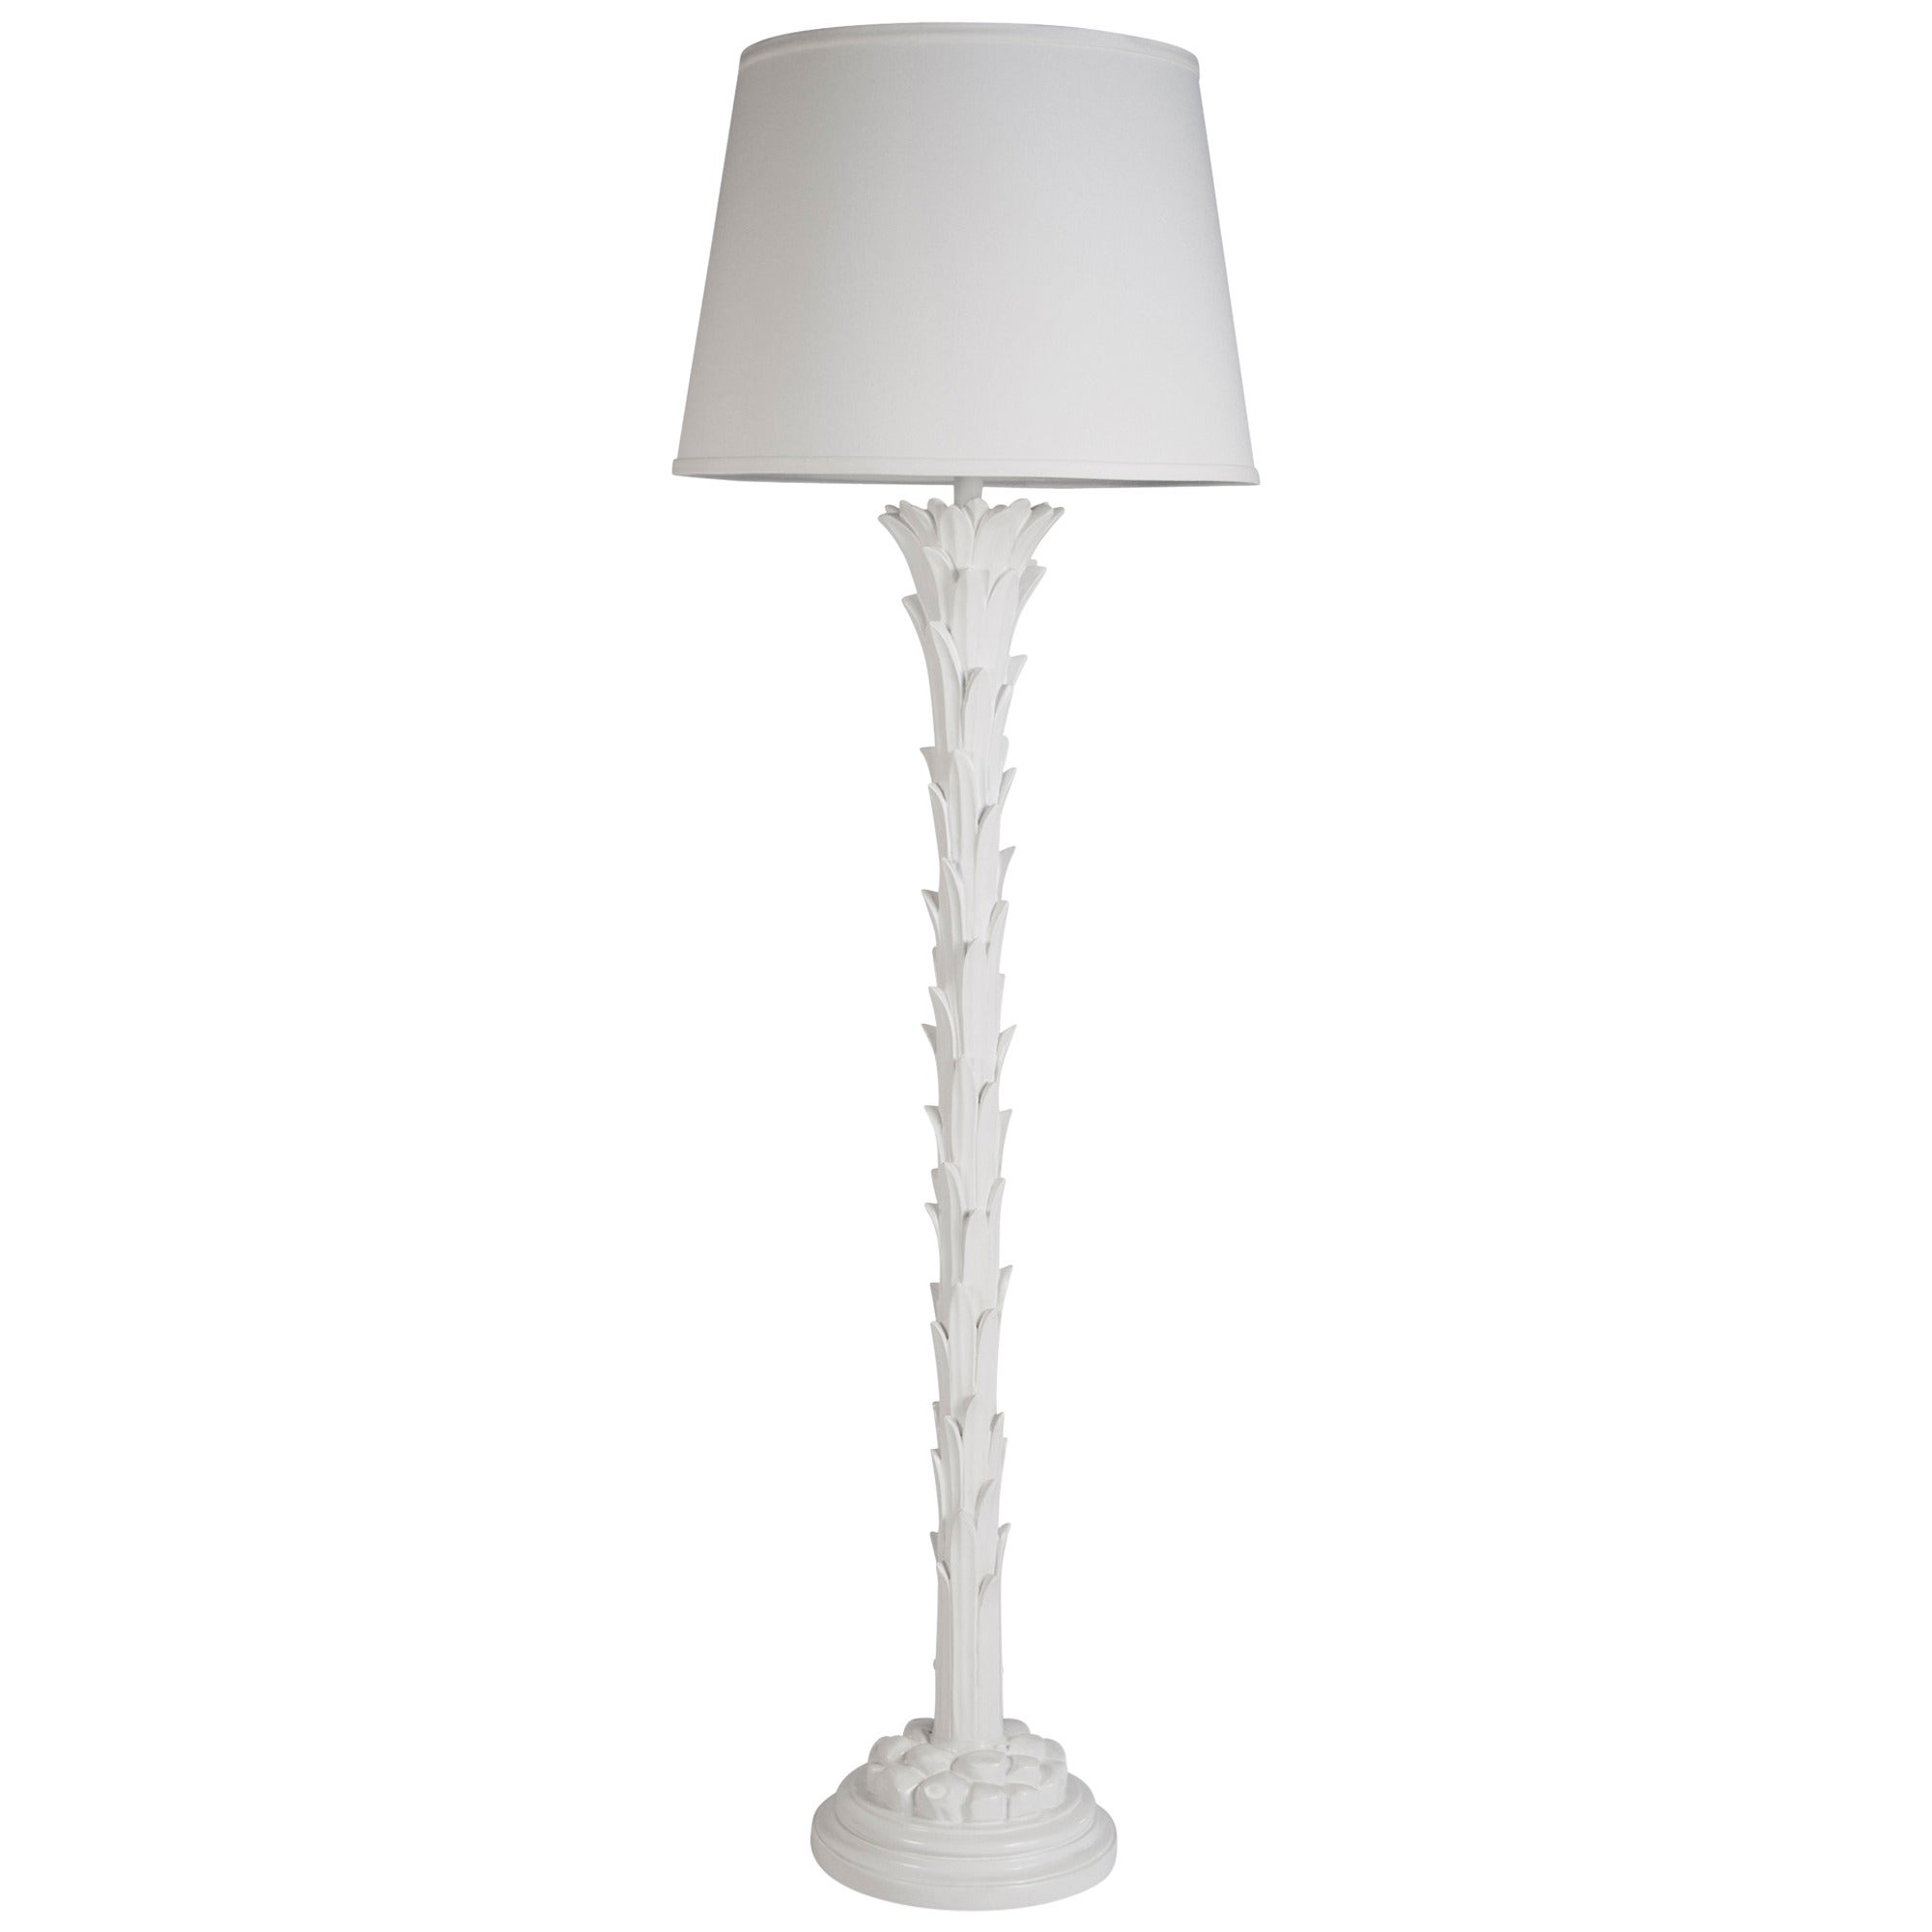 Serge Roche Style Palm Floor Lamp For Sale